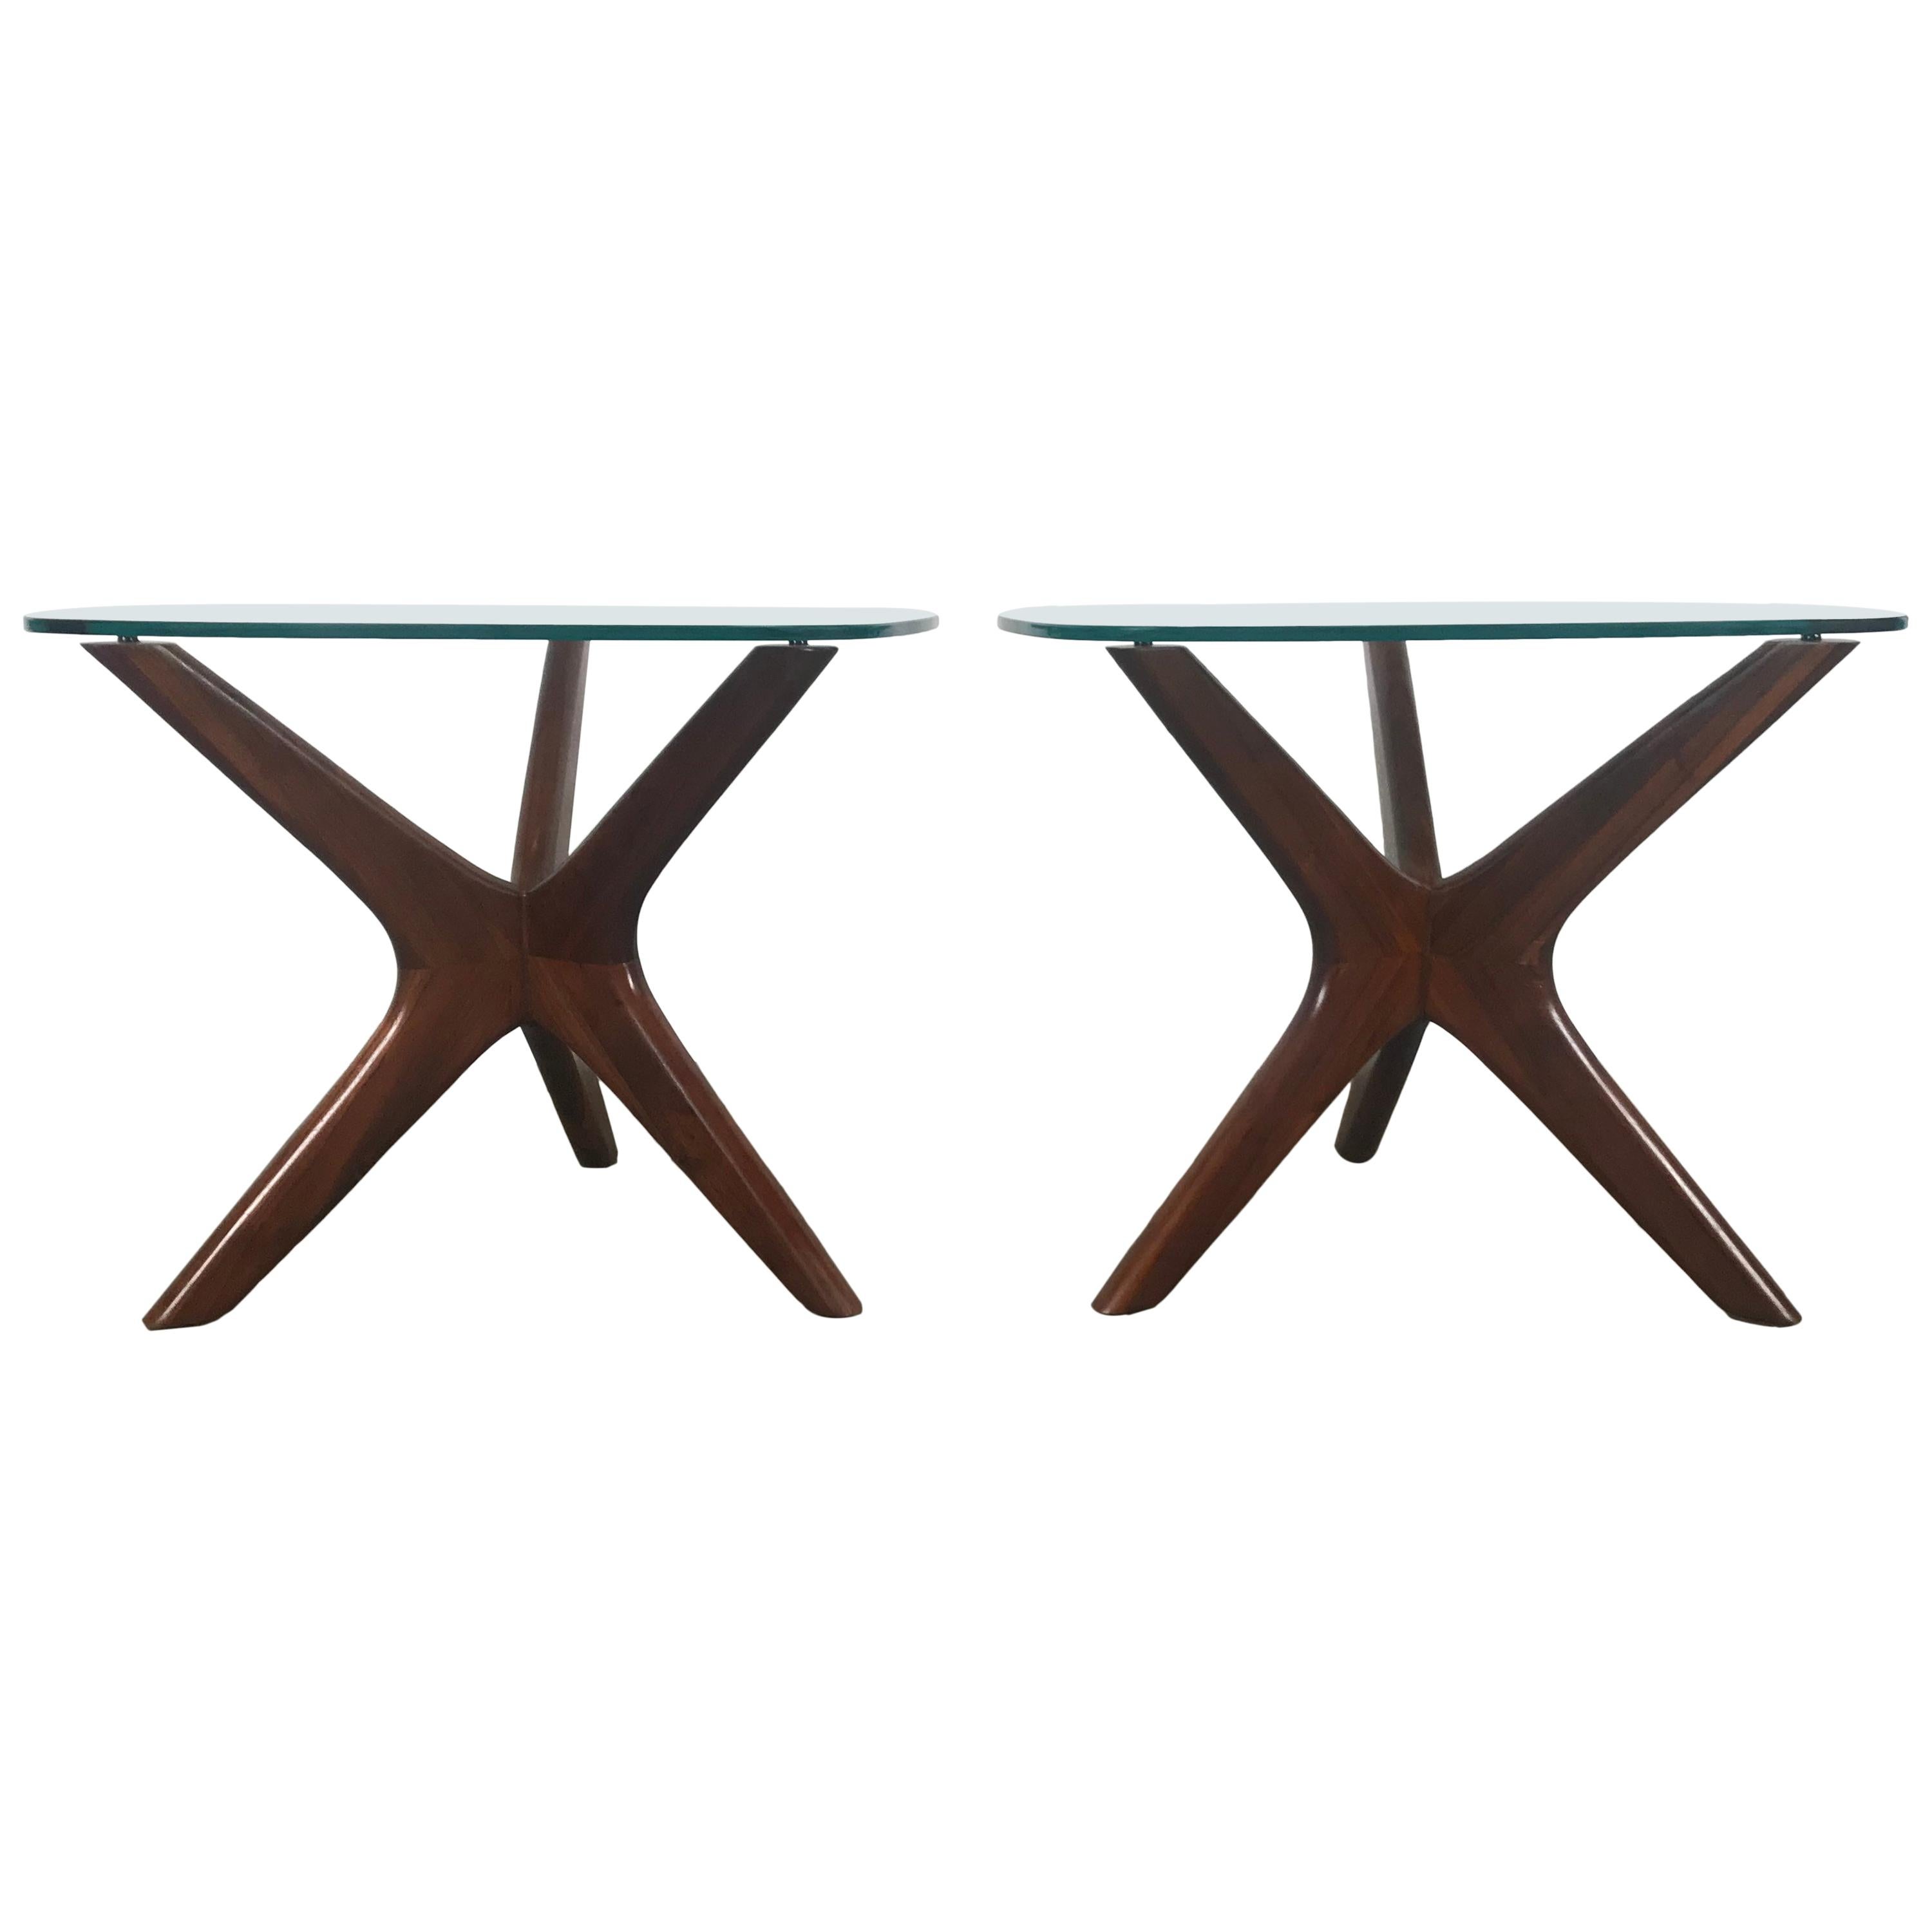 Pair of Sculptural Walnut "Jacks" Lamp Tables by Adrian Pearsall